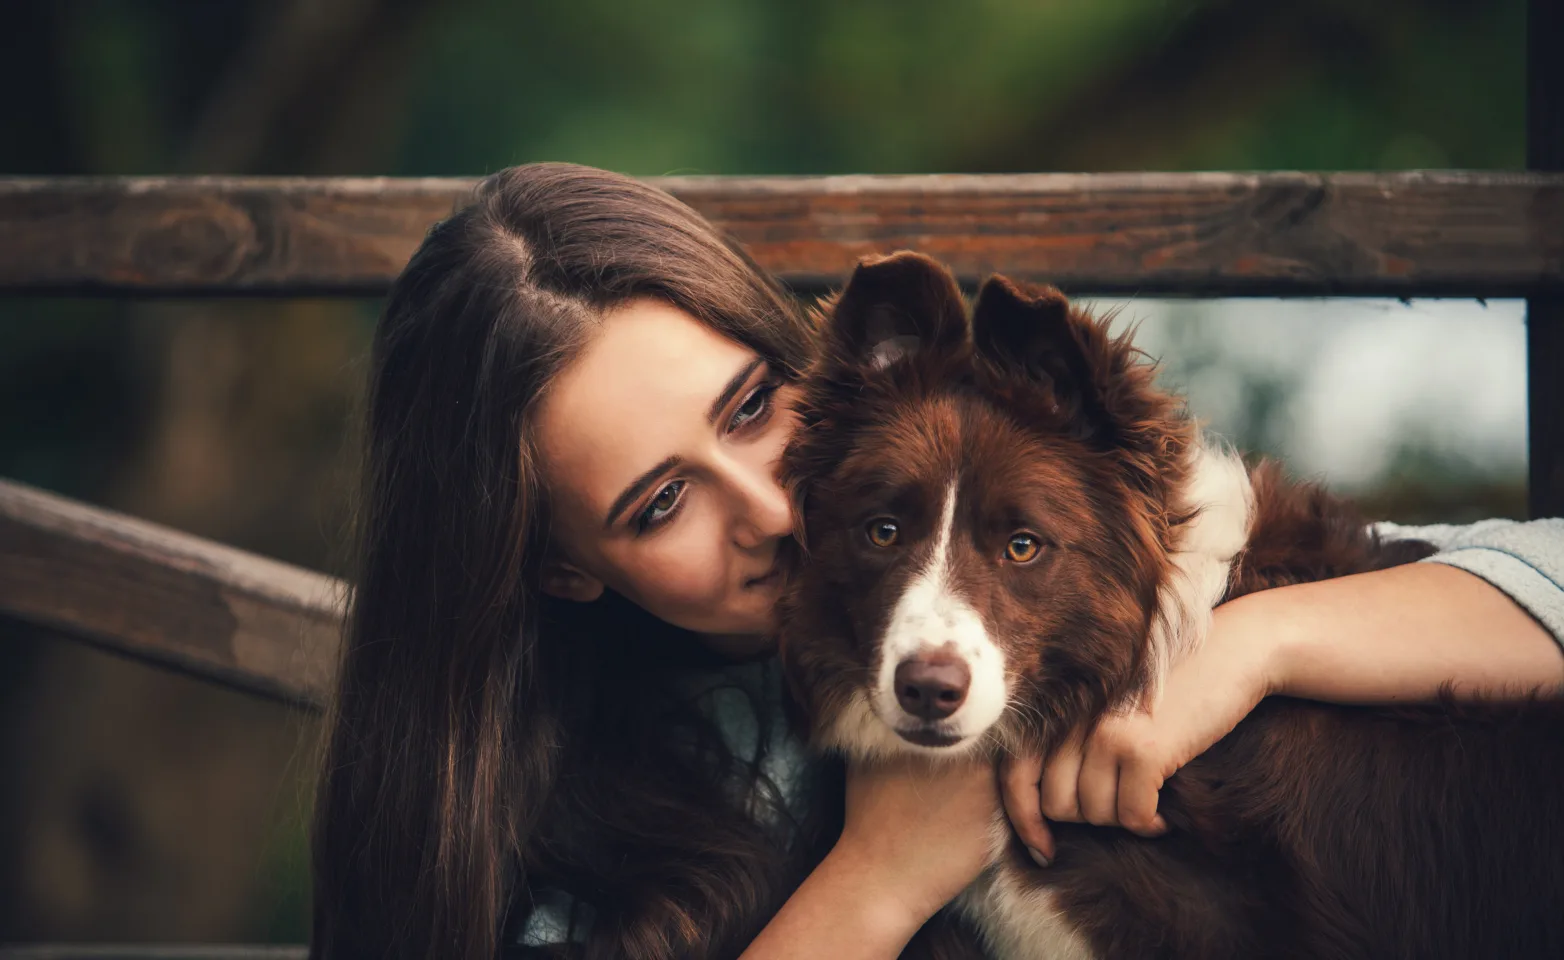 Woman hugging dog in front of gate